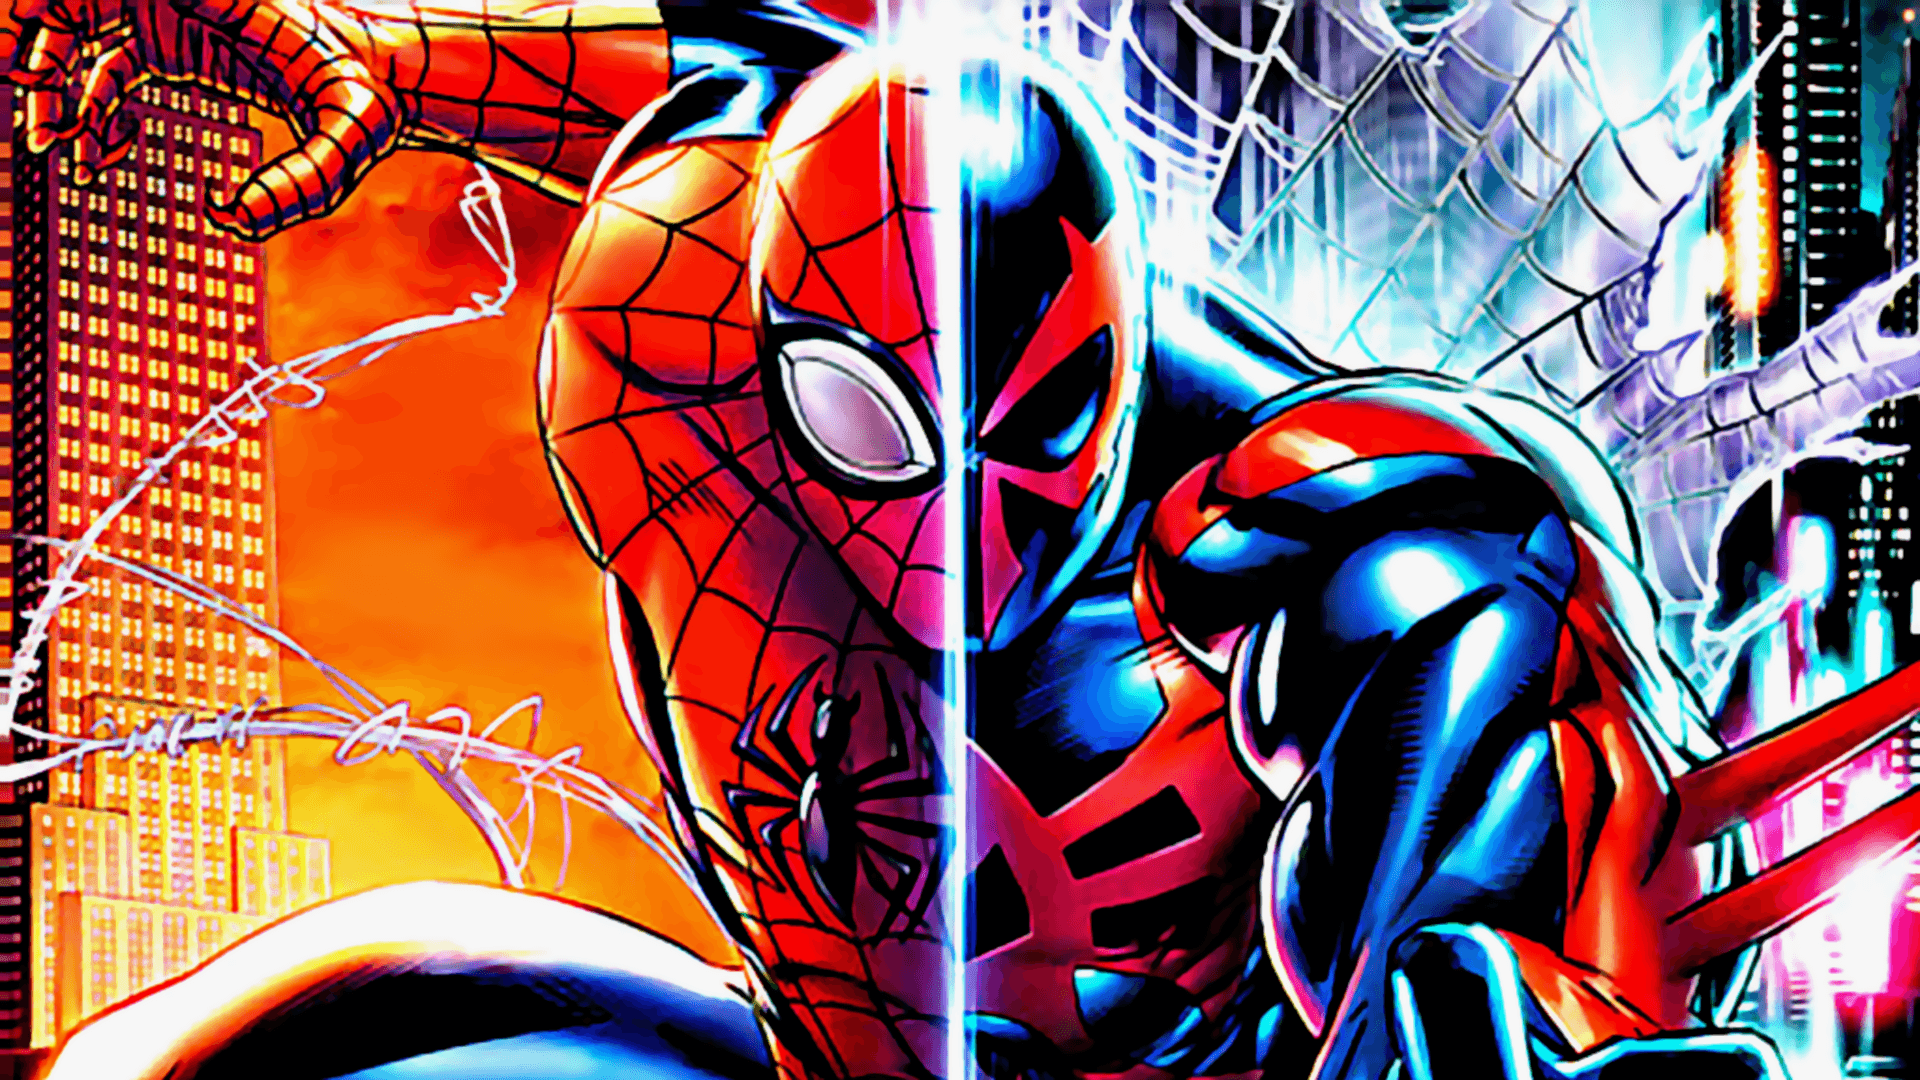 Spider Man 2099 Hd Wallpapers Wallpaper Cave.